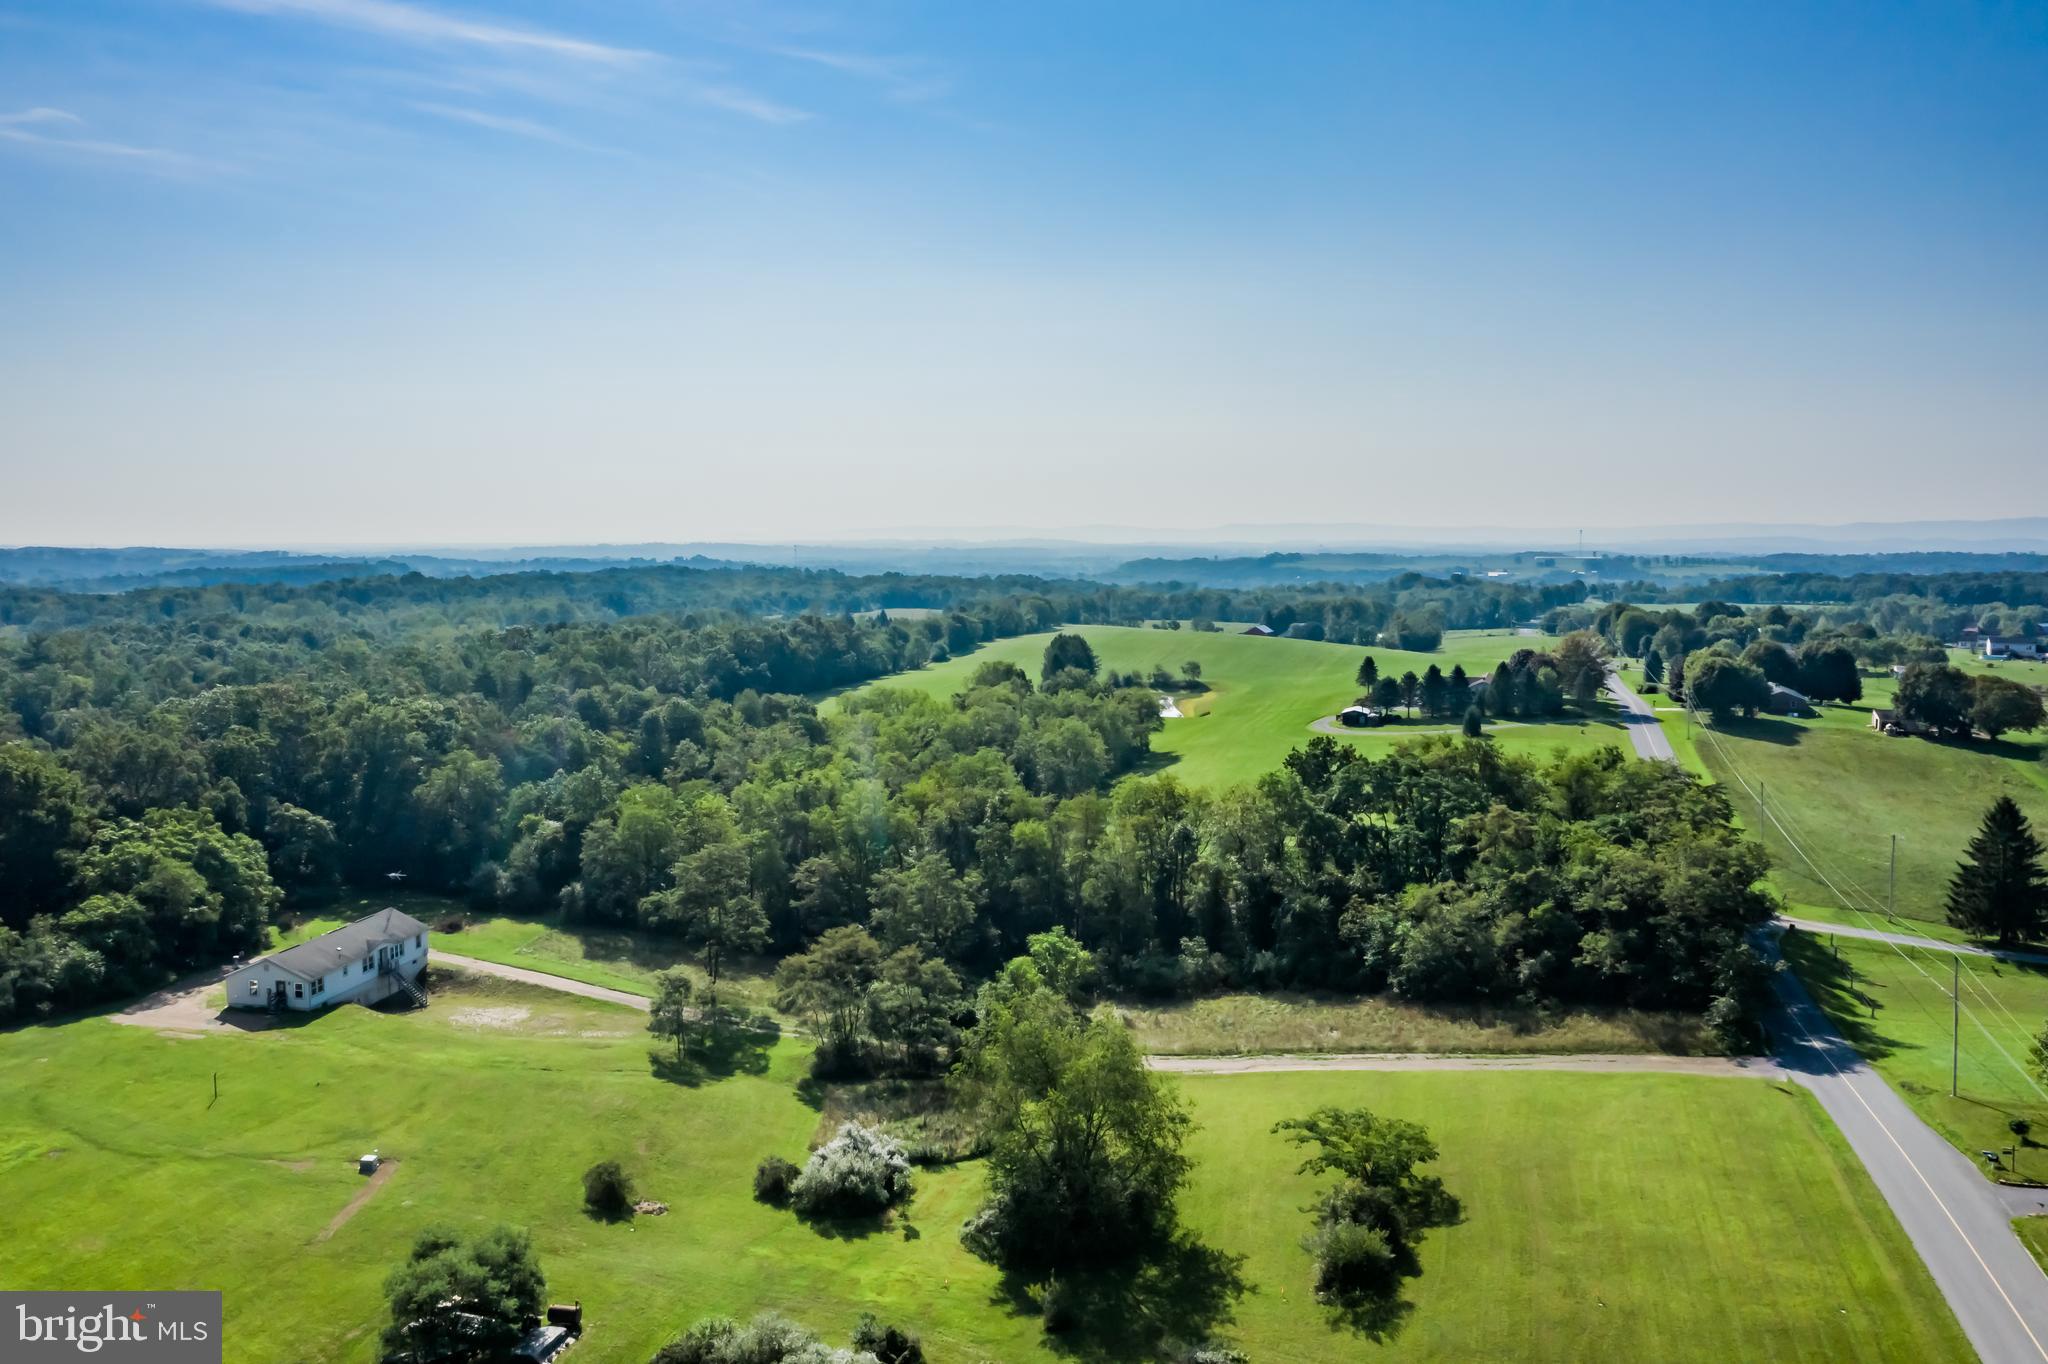 an aerial view of a golf course with a lake view